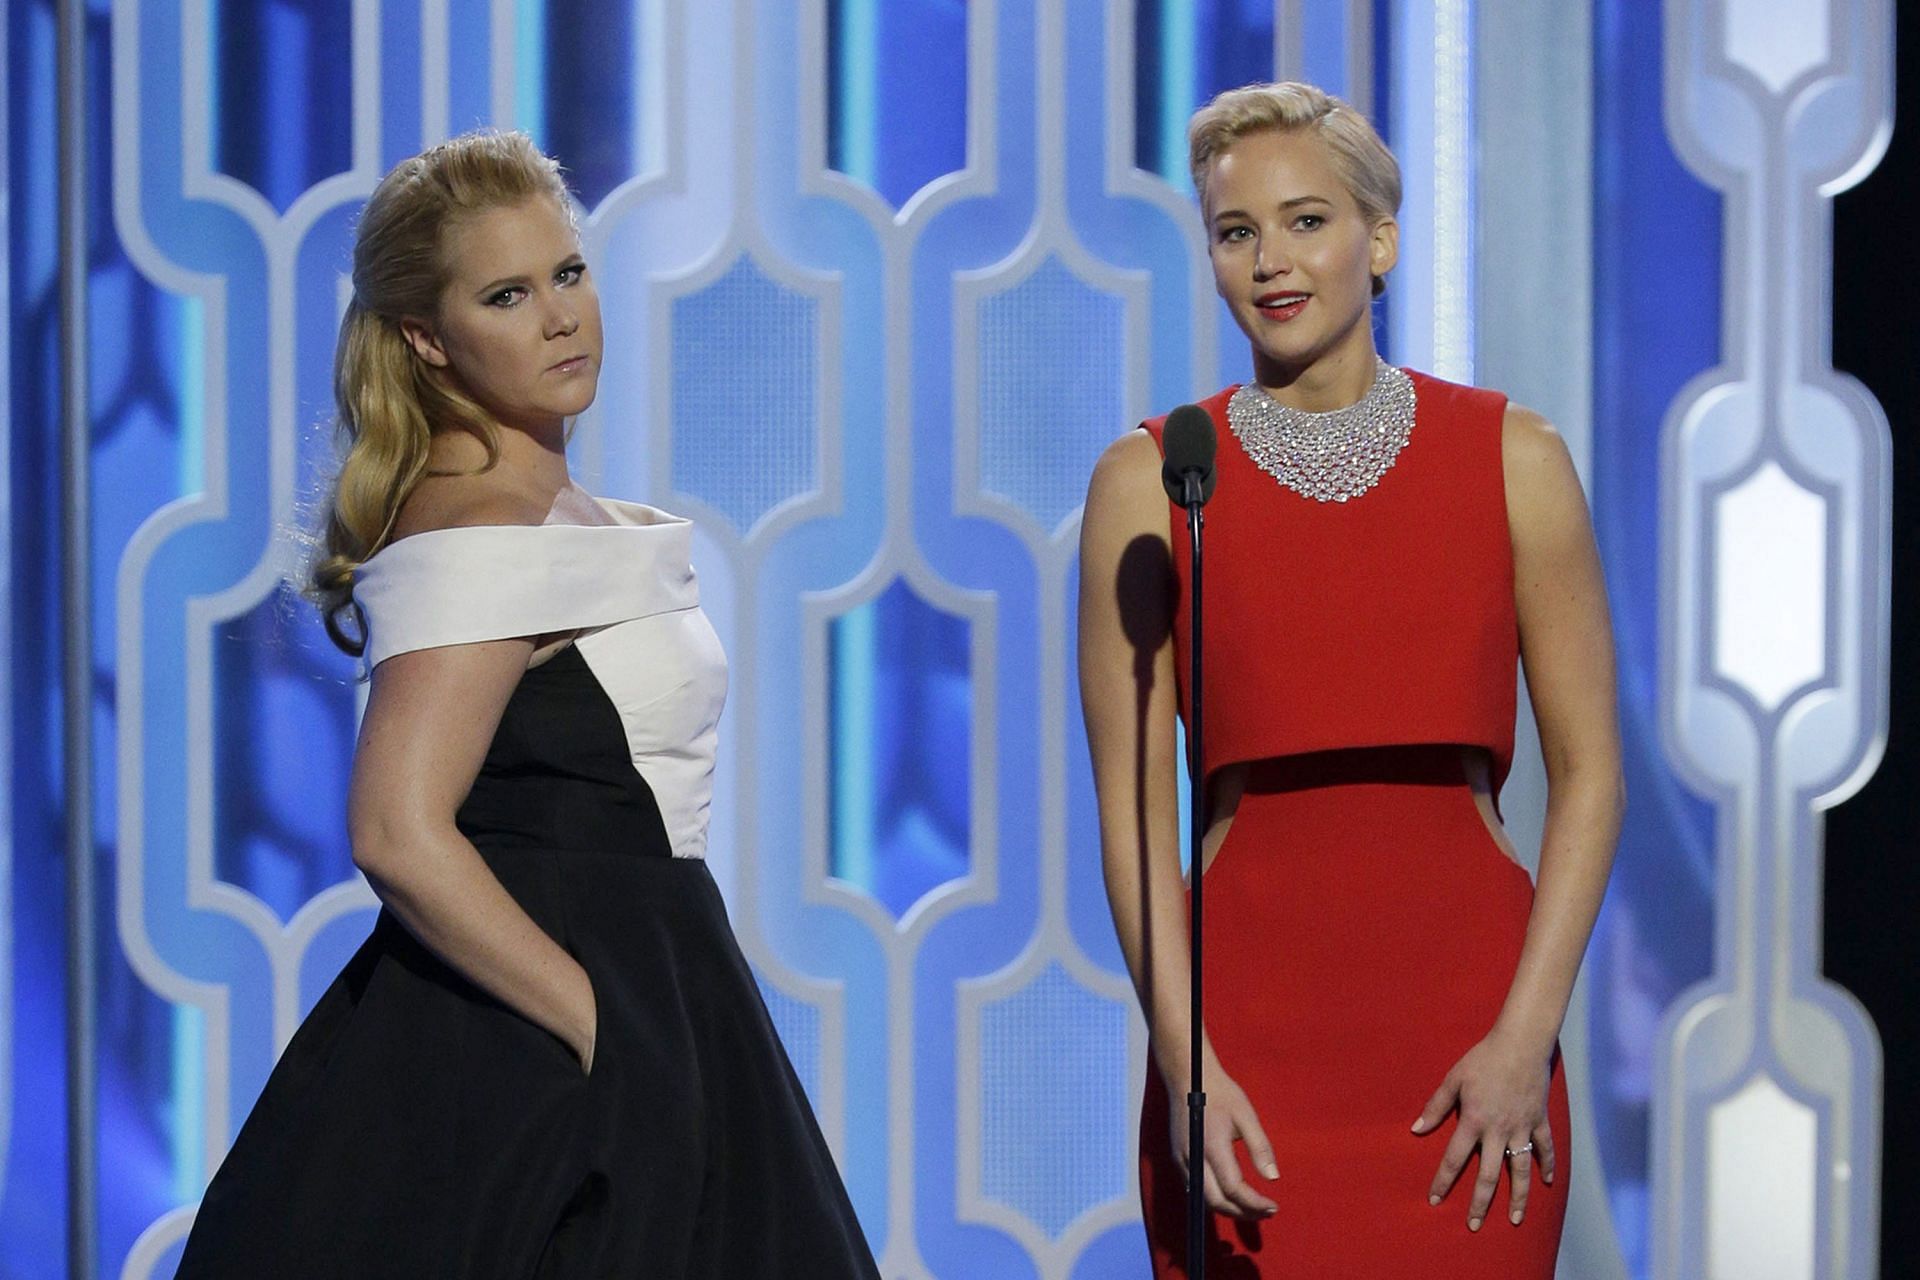 Jennifer Lawrence and Amy Schumer at the 73rd Annual Golden Globe Awards. (Image via Getty)